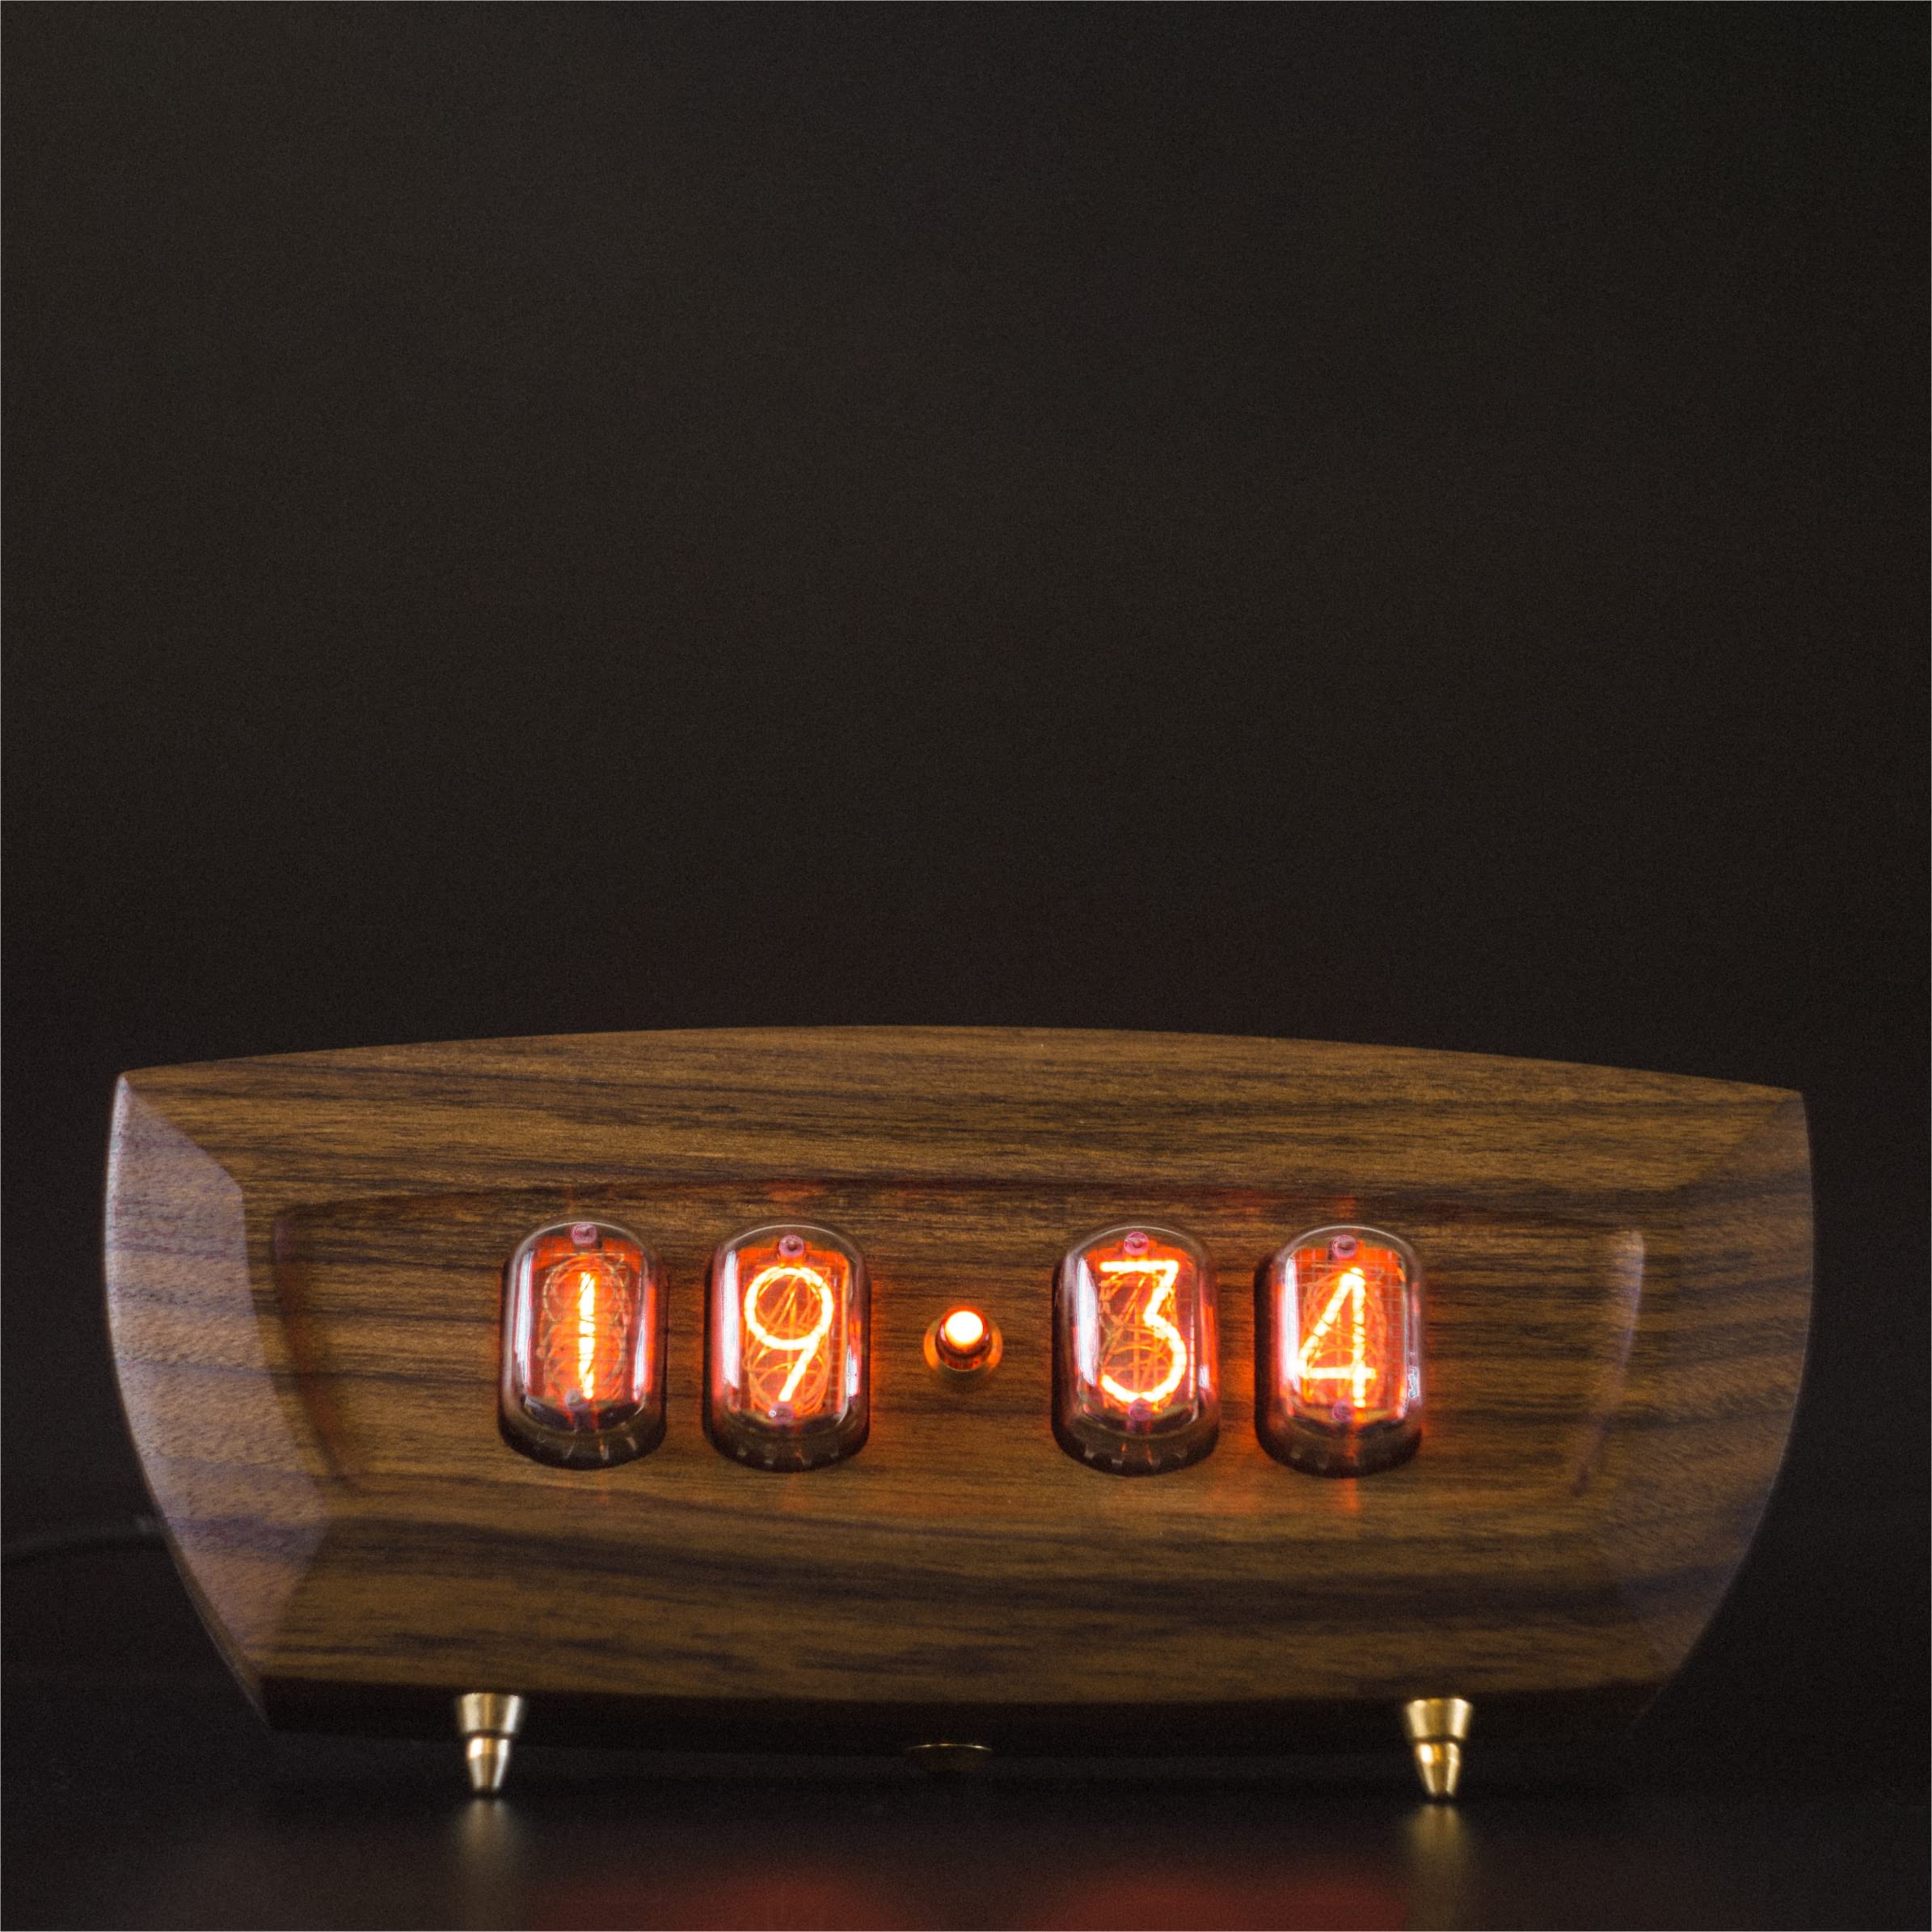 Nixie Tube Clock with Easy Replaceable IN-12 Nixie Tubes - Motion Sensor - Visual Effects - RGB Backlight - Christmas Gift Idea